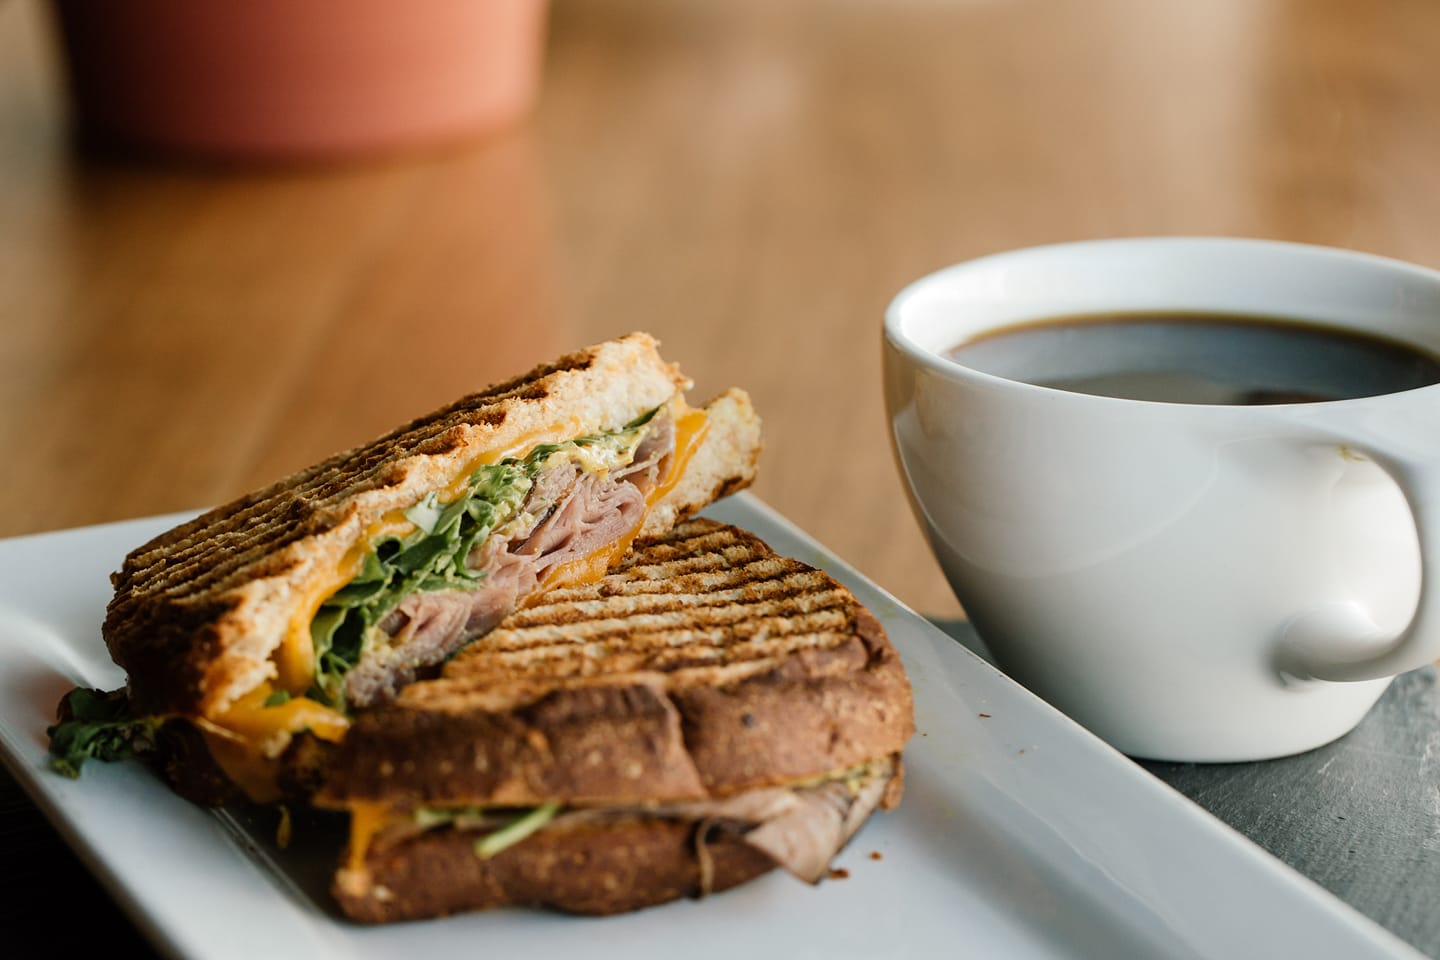 A sandwich from Ponder Coffee Company in Mt. Pleasant, Michigan; this local coffee shop roasts its own coffee and is available for purchase at two locations in Mt. Pleasant, Michigan.